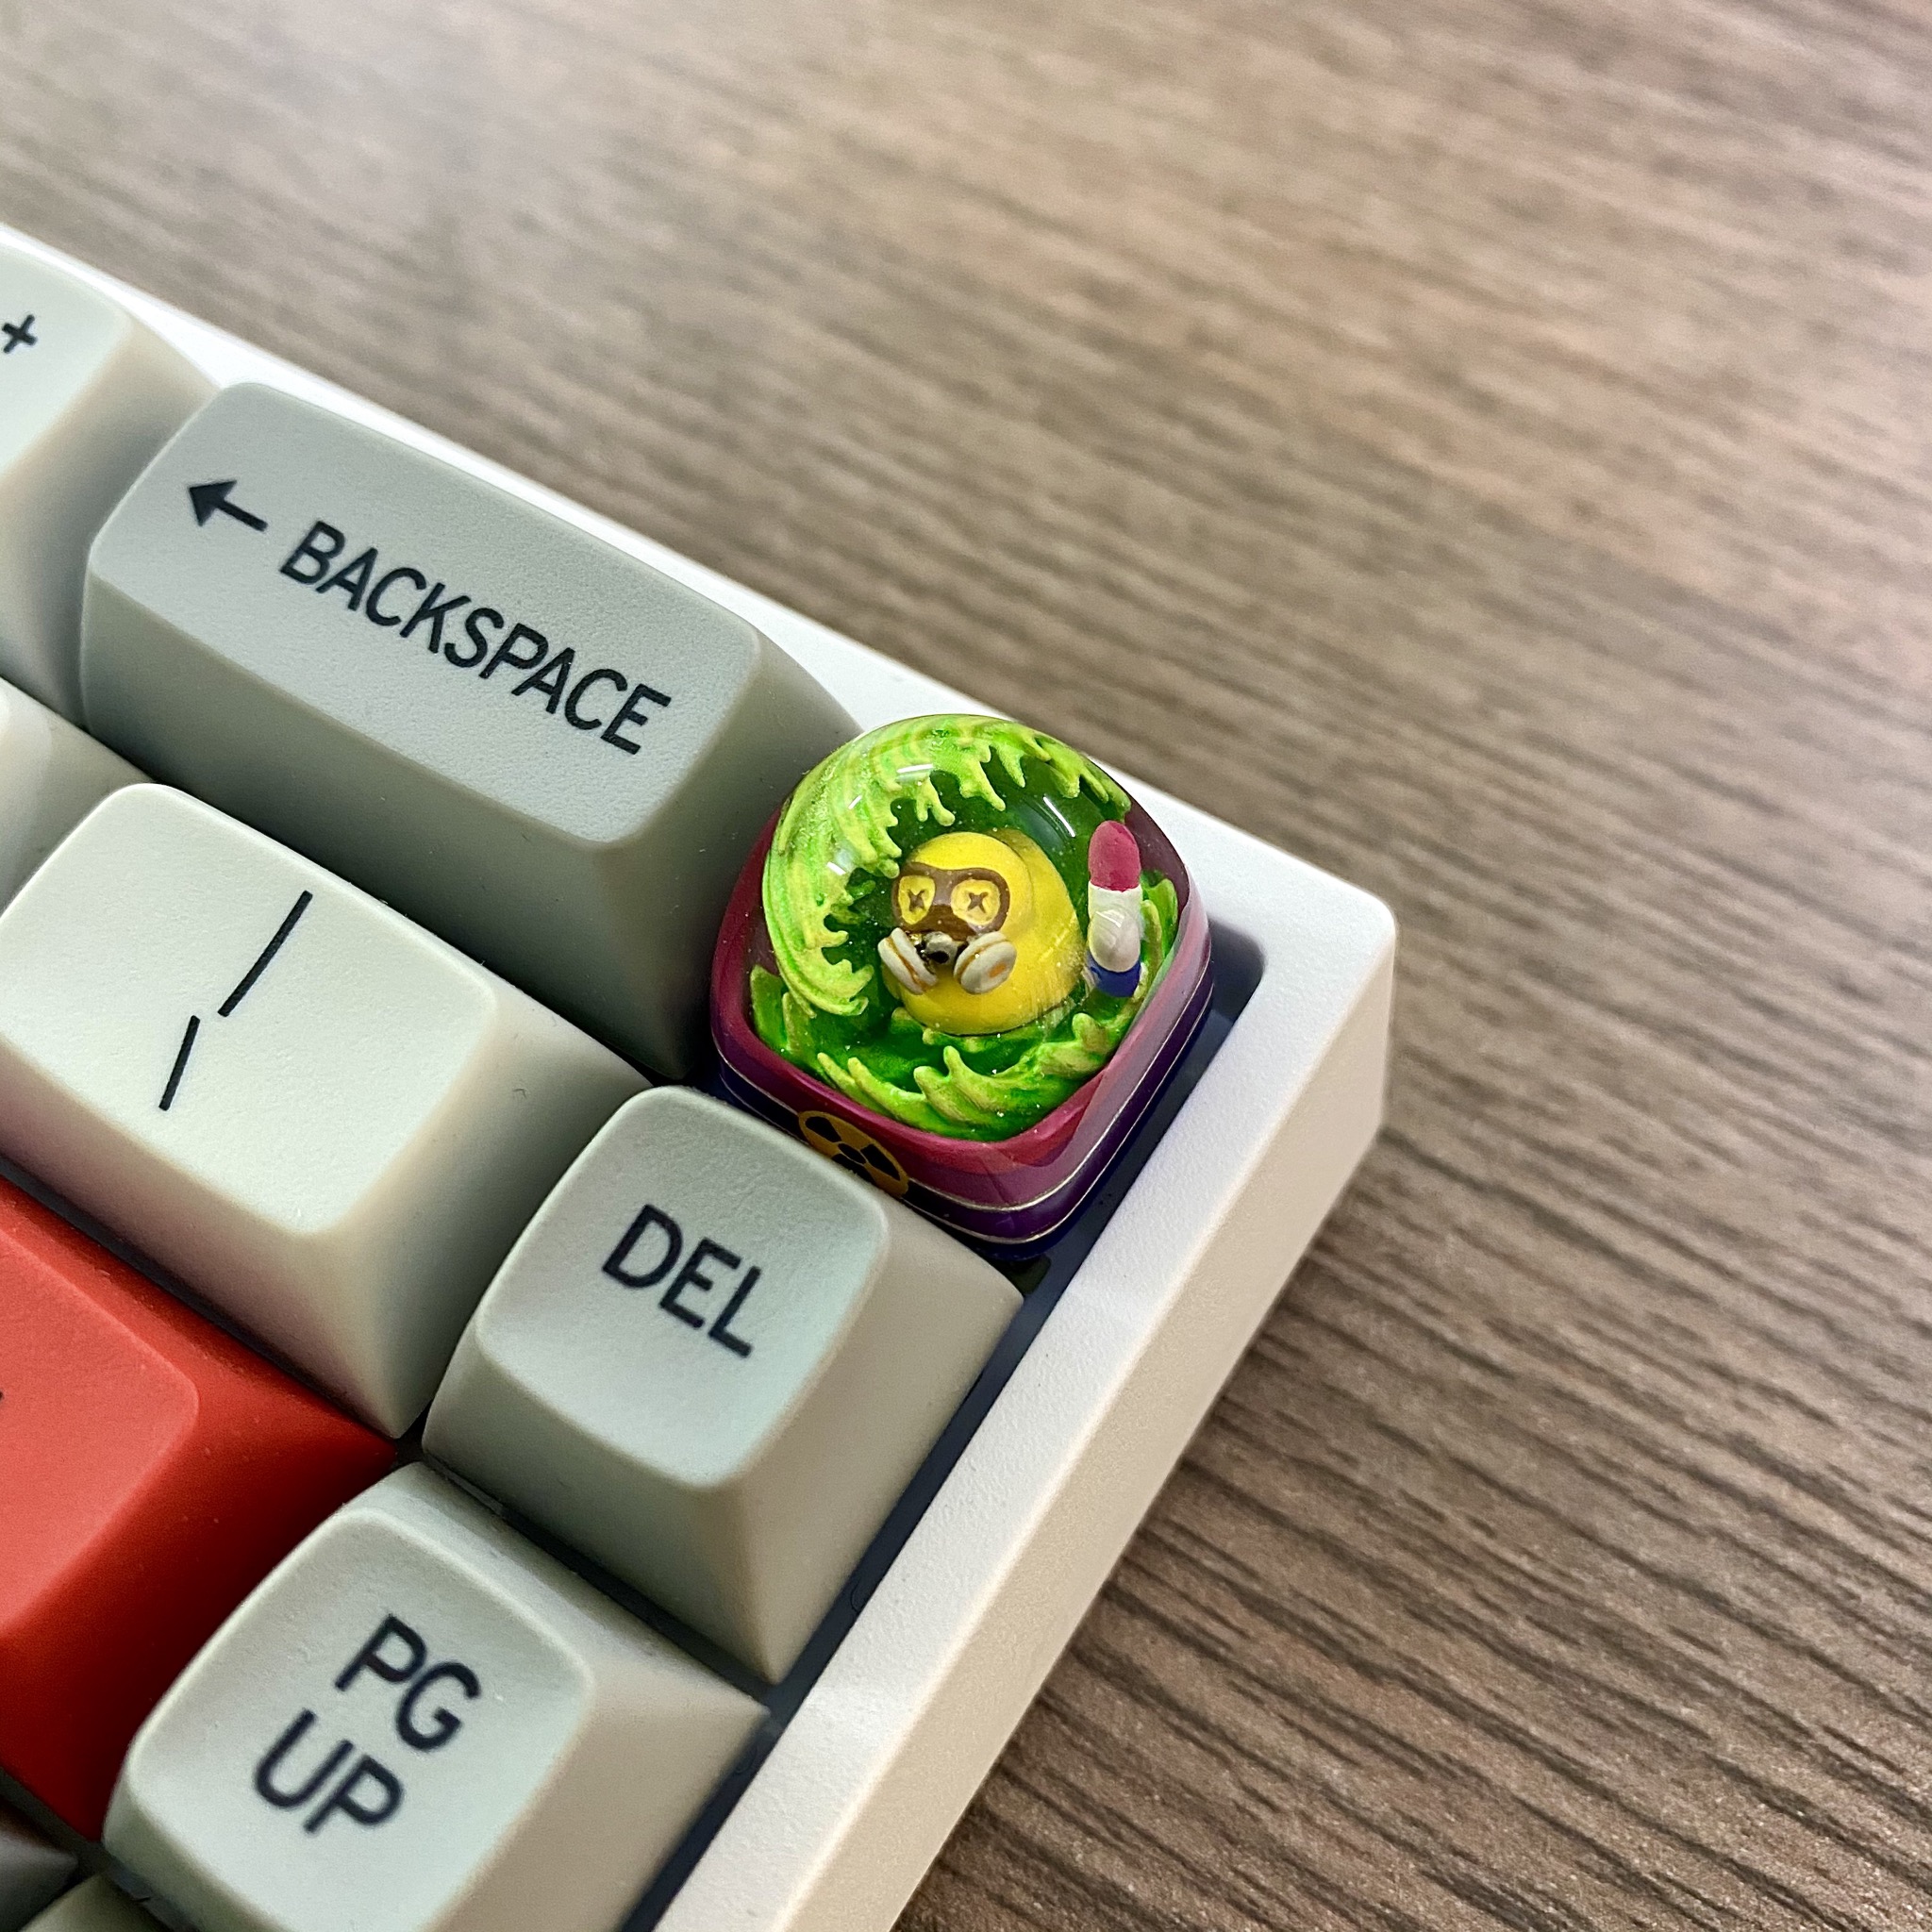 Keycap The Great Duckie made by DWARF FACTORY